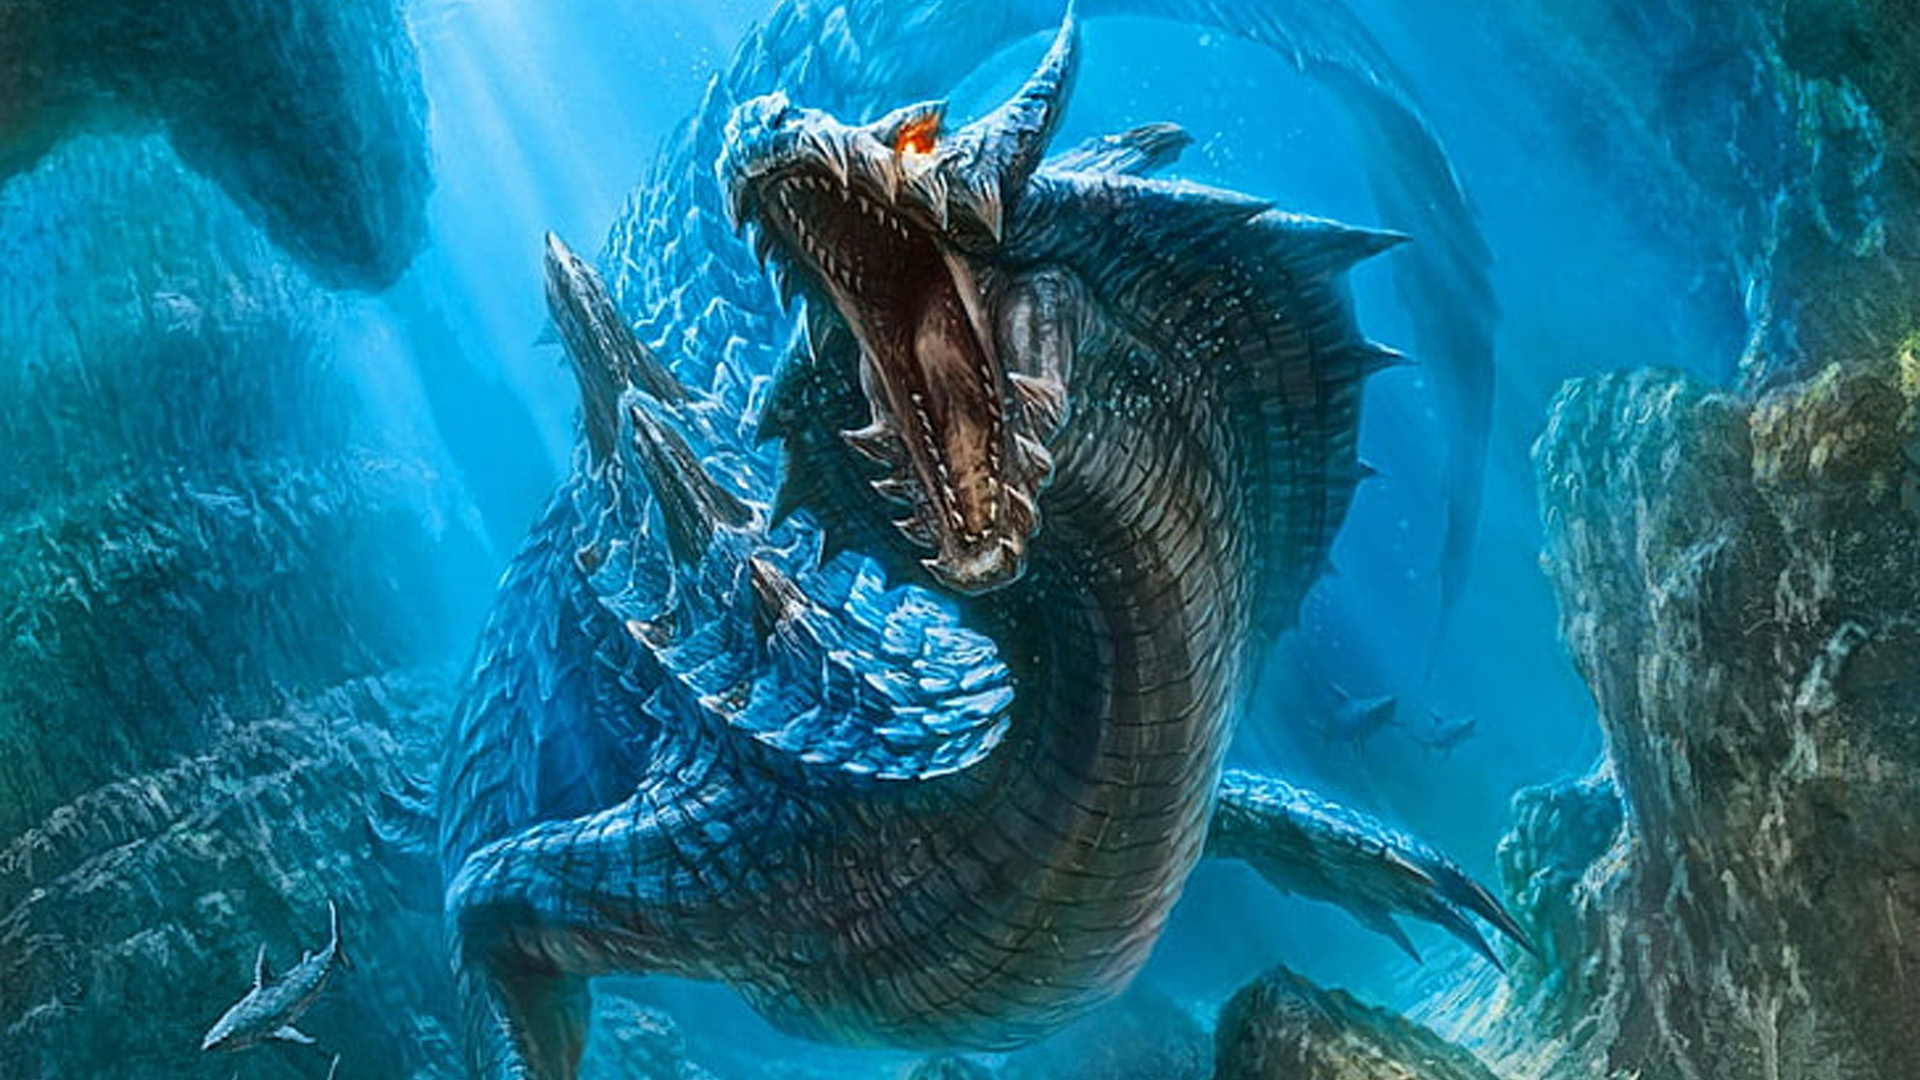 Dragon With Open Mouth Underwater 2K Dragon